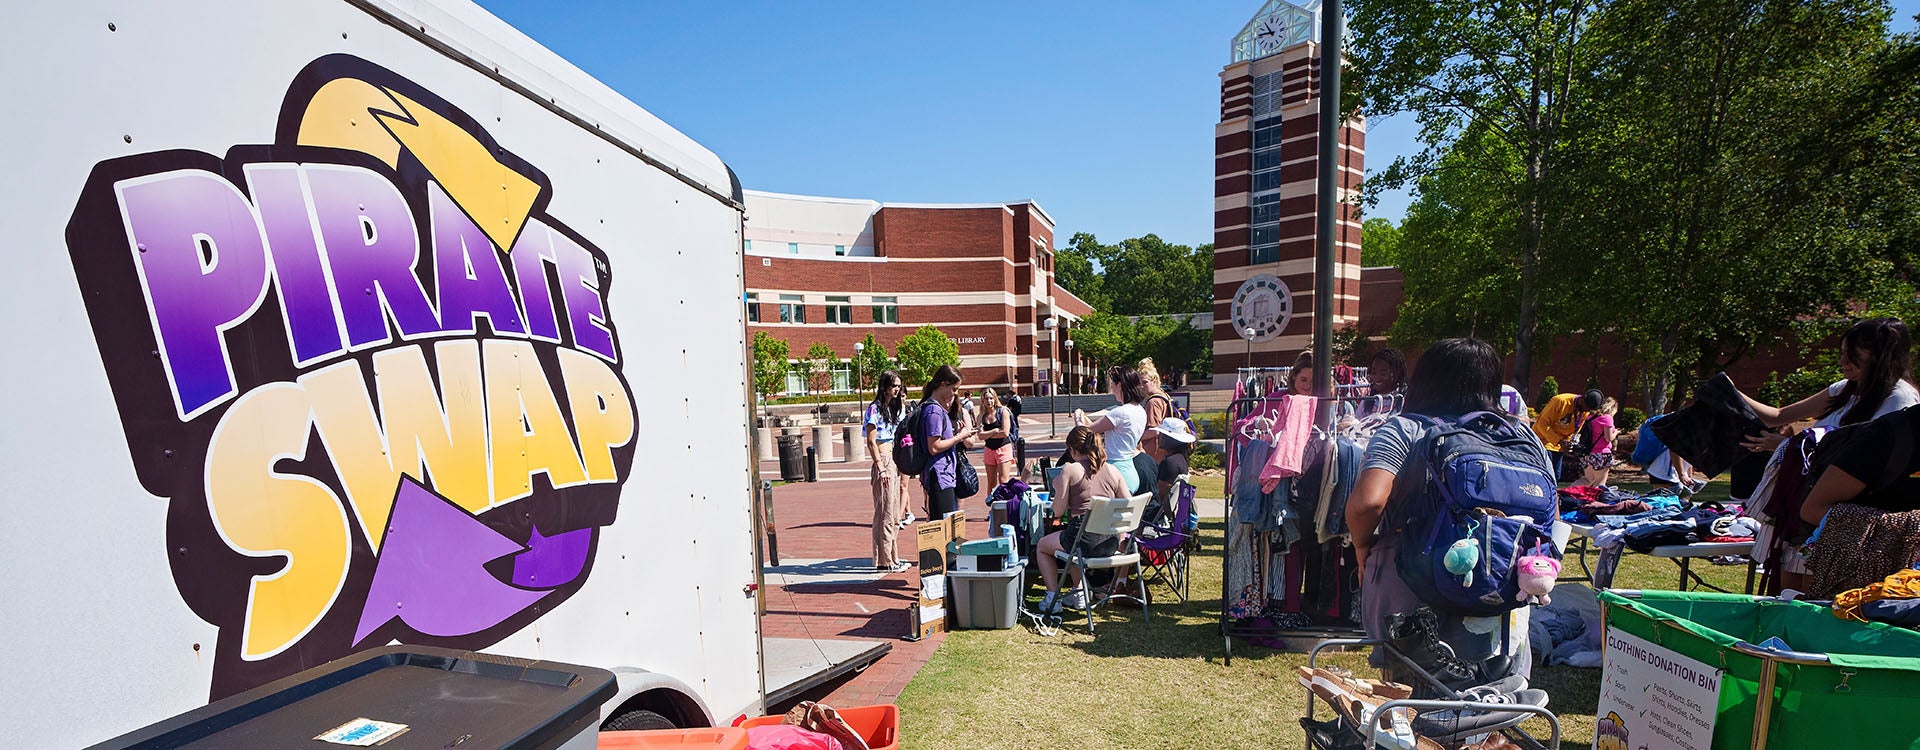 Pirate Swap hosts a pop-up thrift shop once a semester to combat fast fashion and promote sustainability efforts on ECU’s campus.